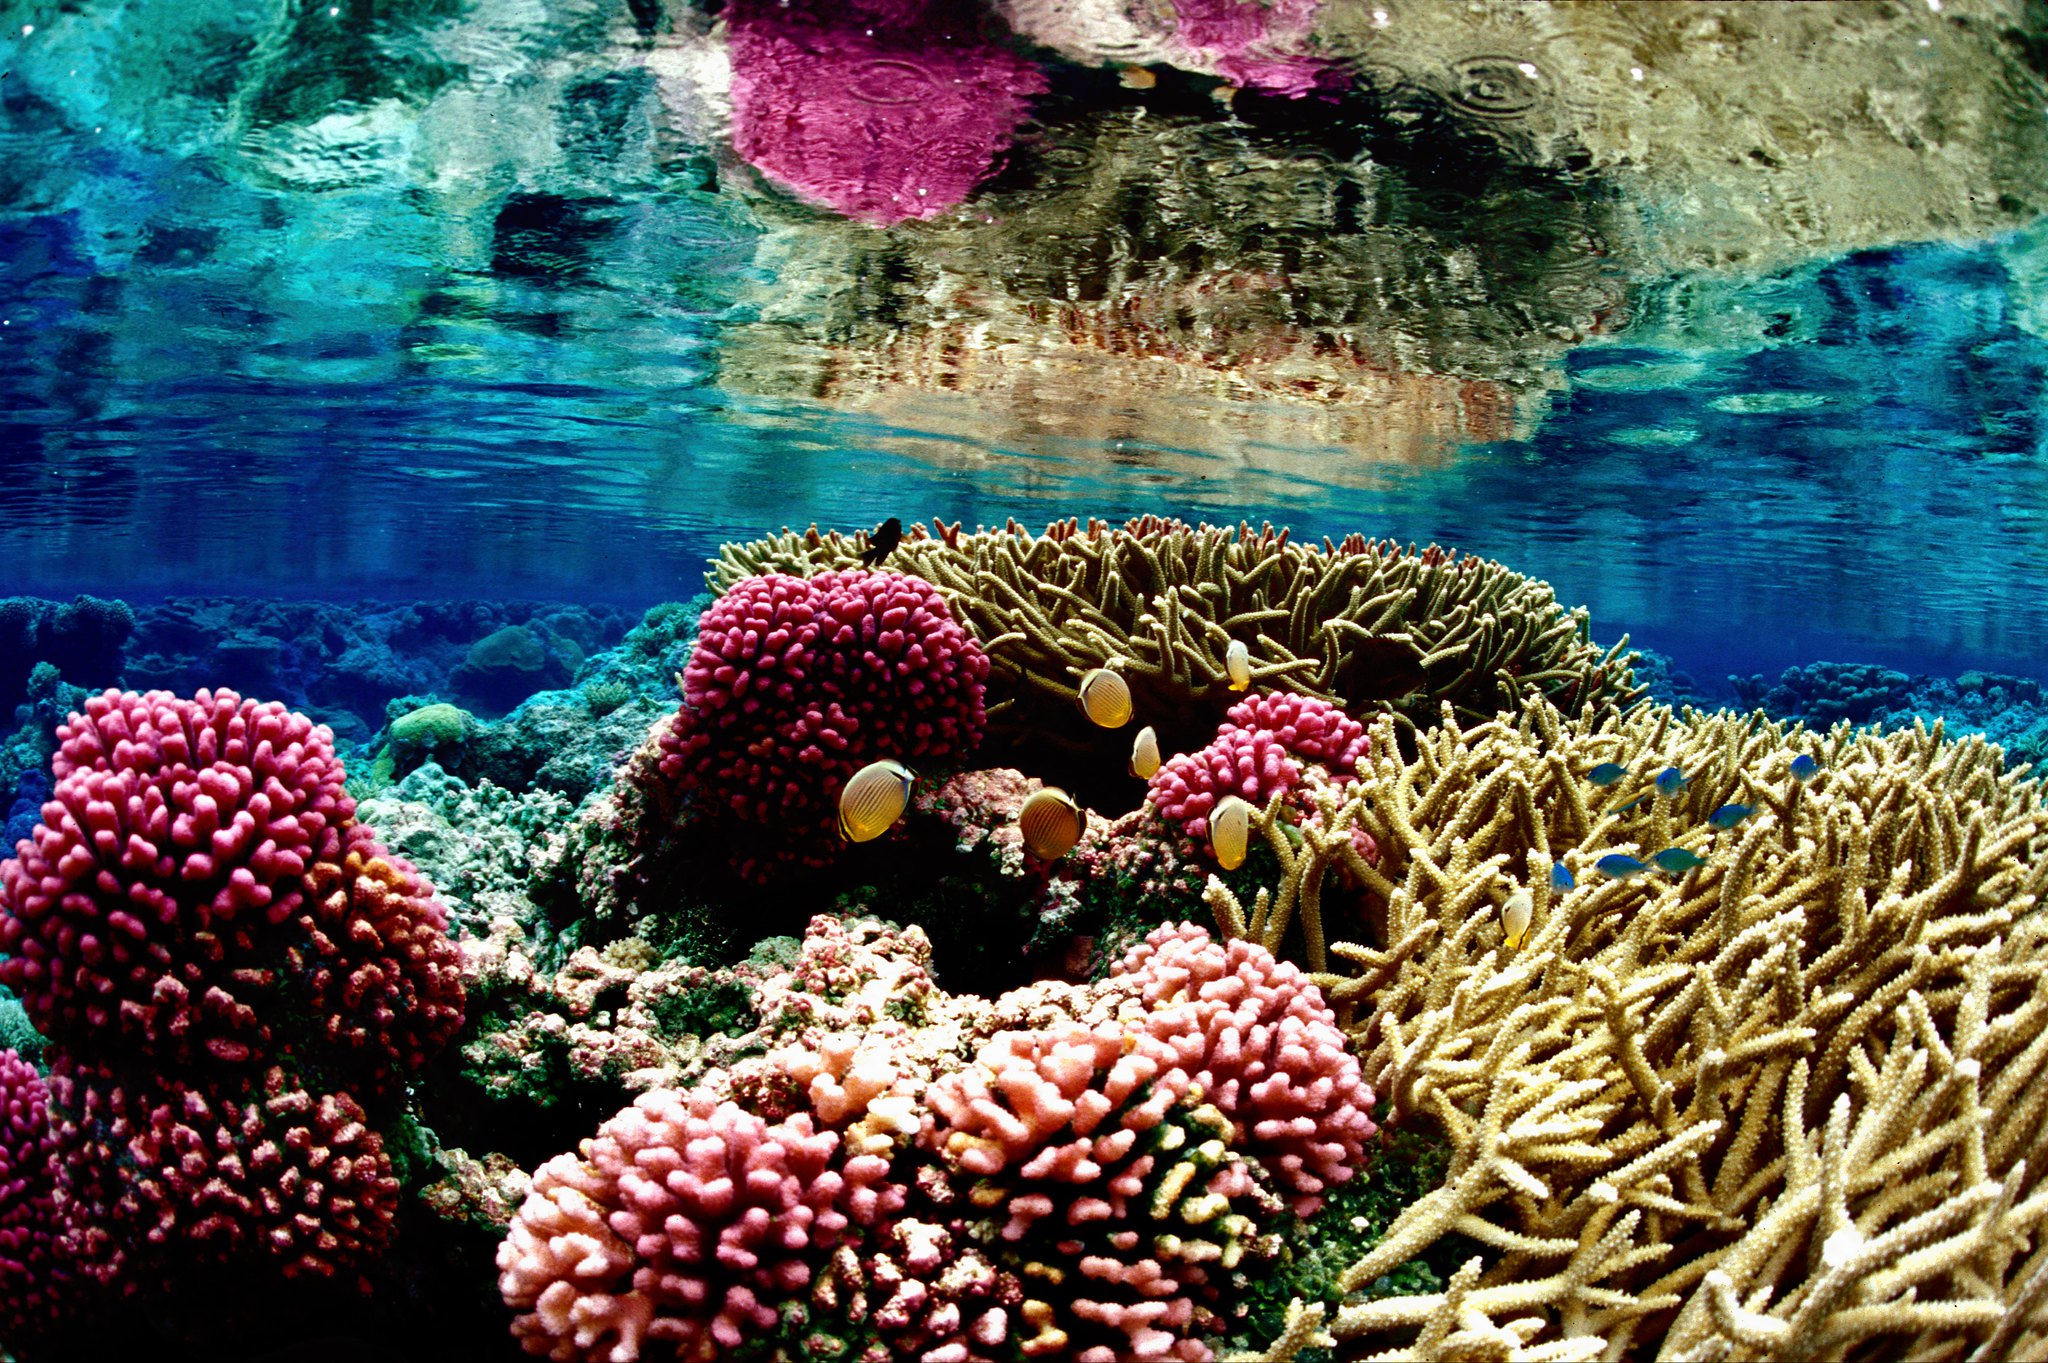 A colorful coral reef.